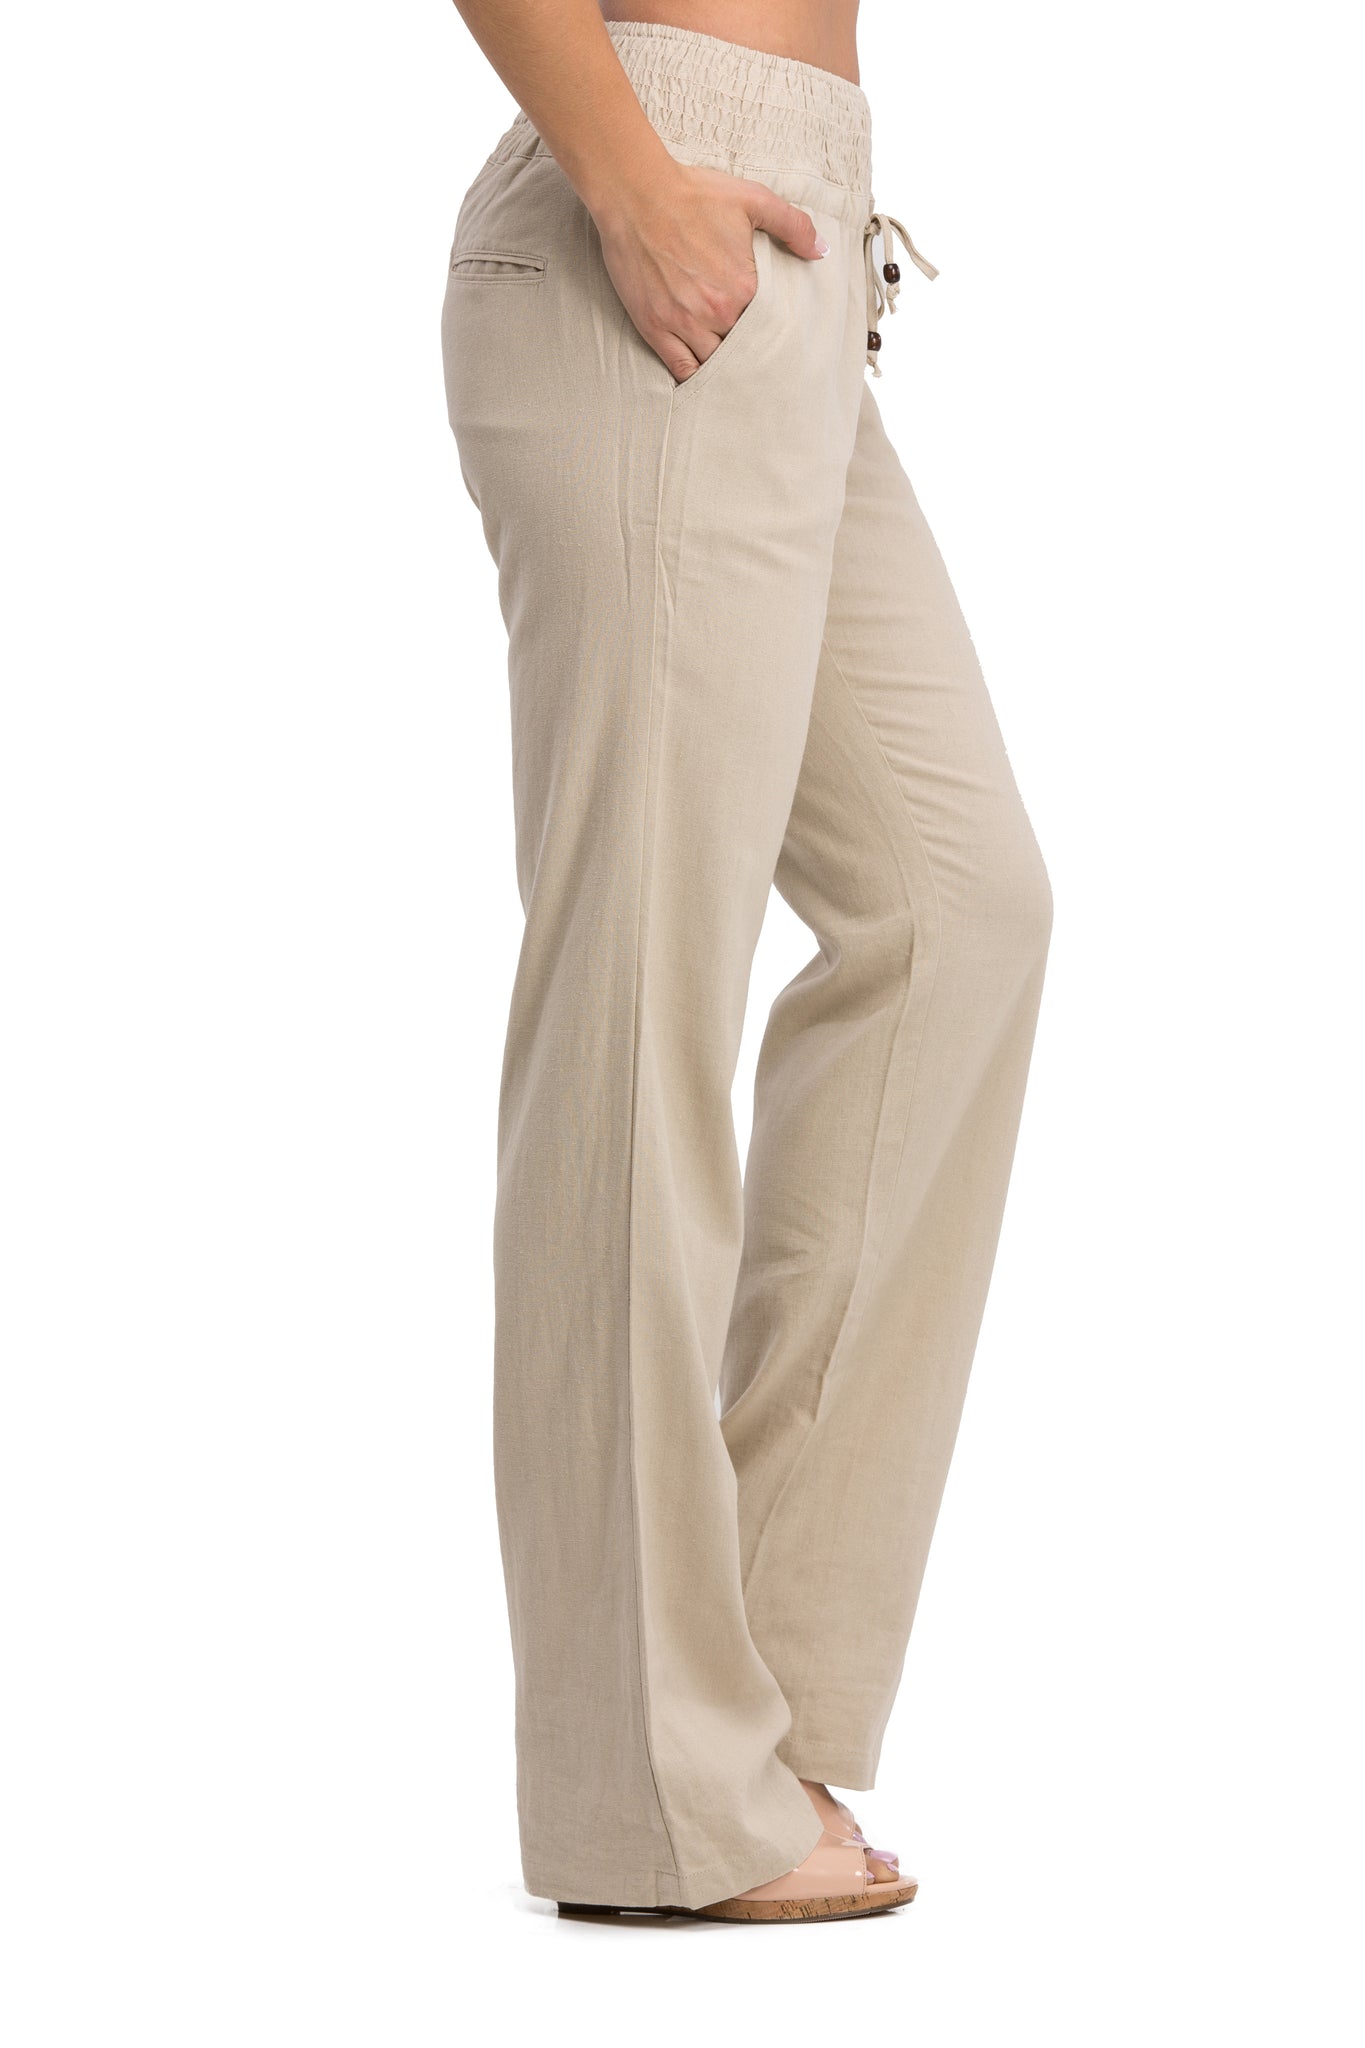 Comfy Drawstring Linen Pants Long with Smocked Band Waist (Natural) - Poplooks